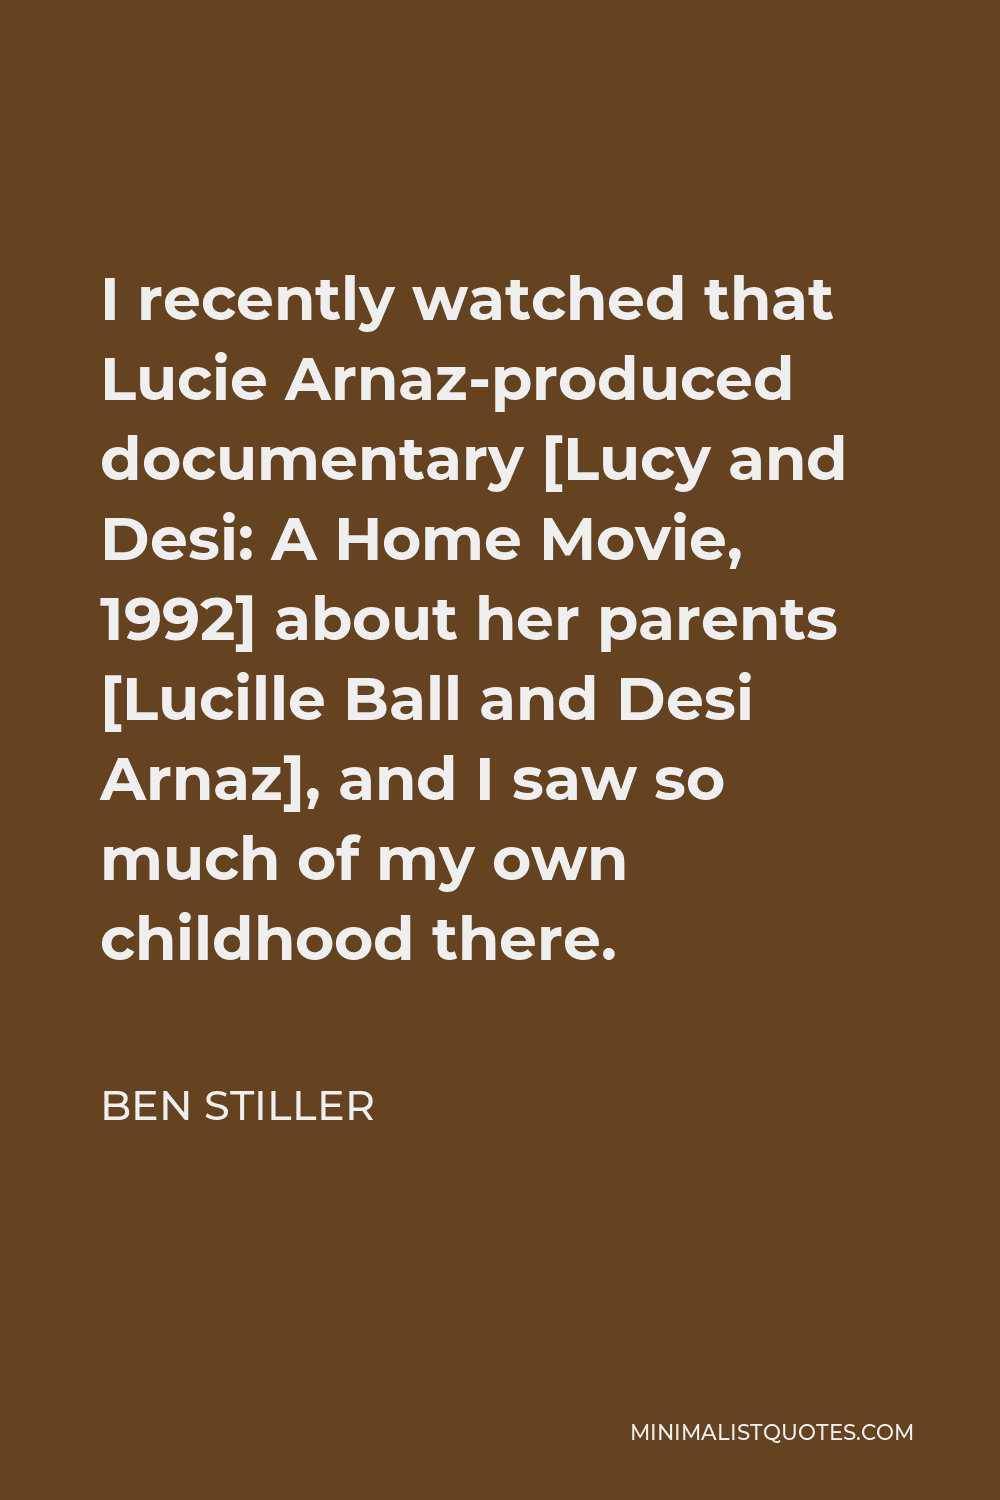 Ben Stiller Quote - I recently watched that Lucie Arnaz-produced documentary [Lucy and Desi: A Home Movie, 1992] about her parents [Lucille Ball and Desi Arnaz], and I saw so much of my own childhood there.